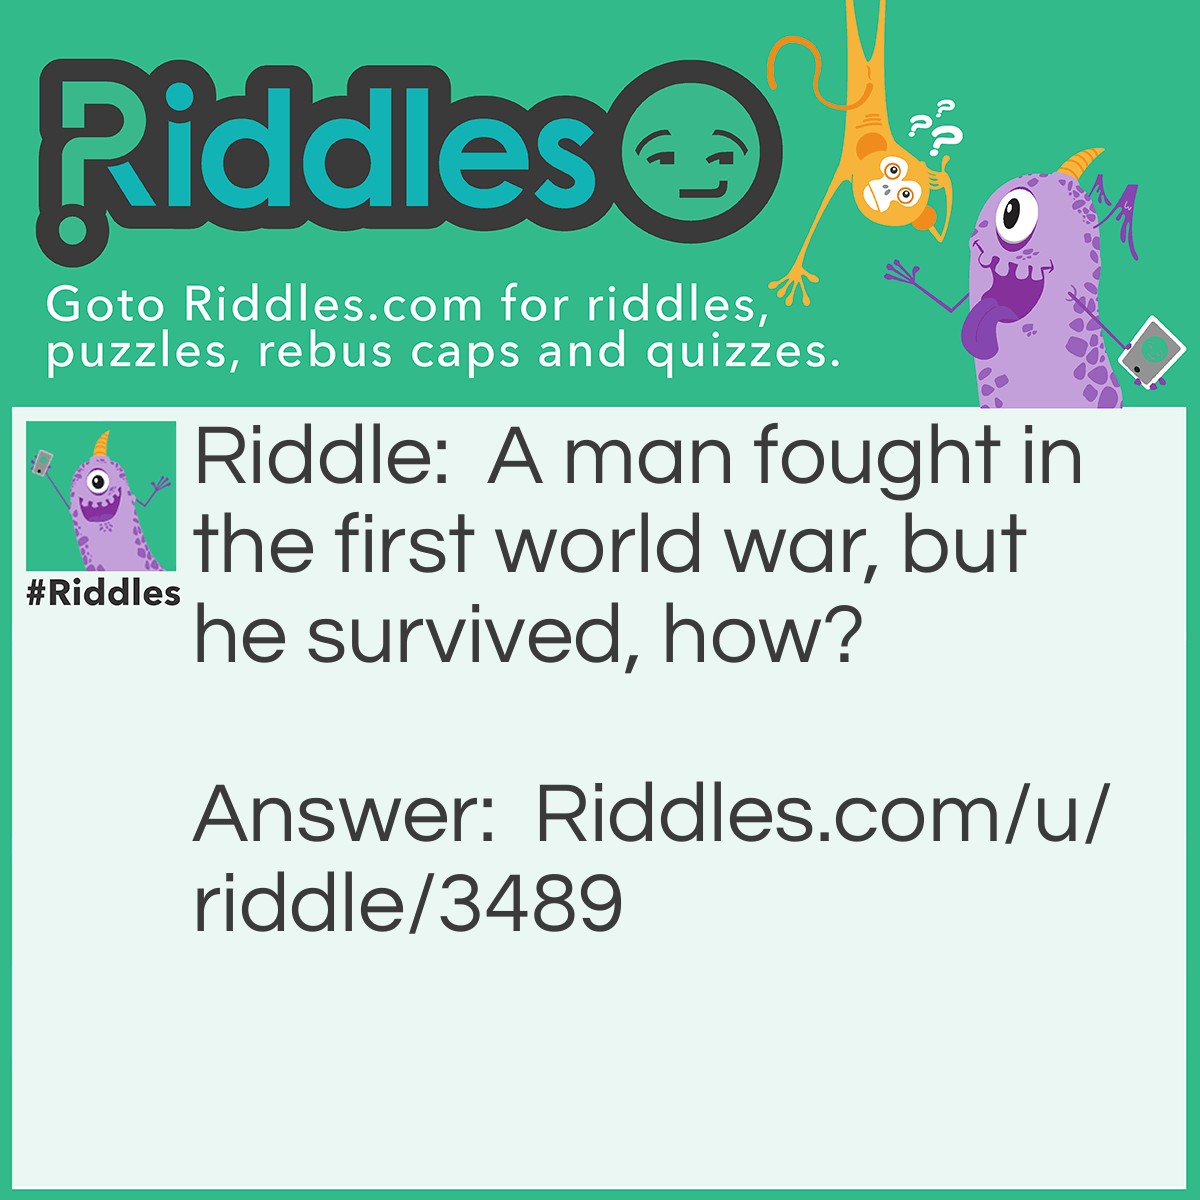 Riddle: A man fought in the first world war, but he survived. How? Answer: Battlefield 1.